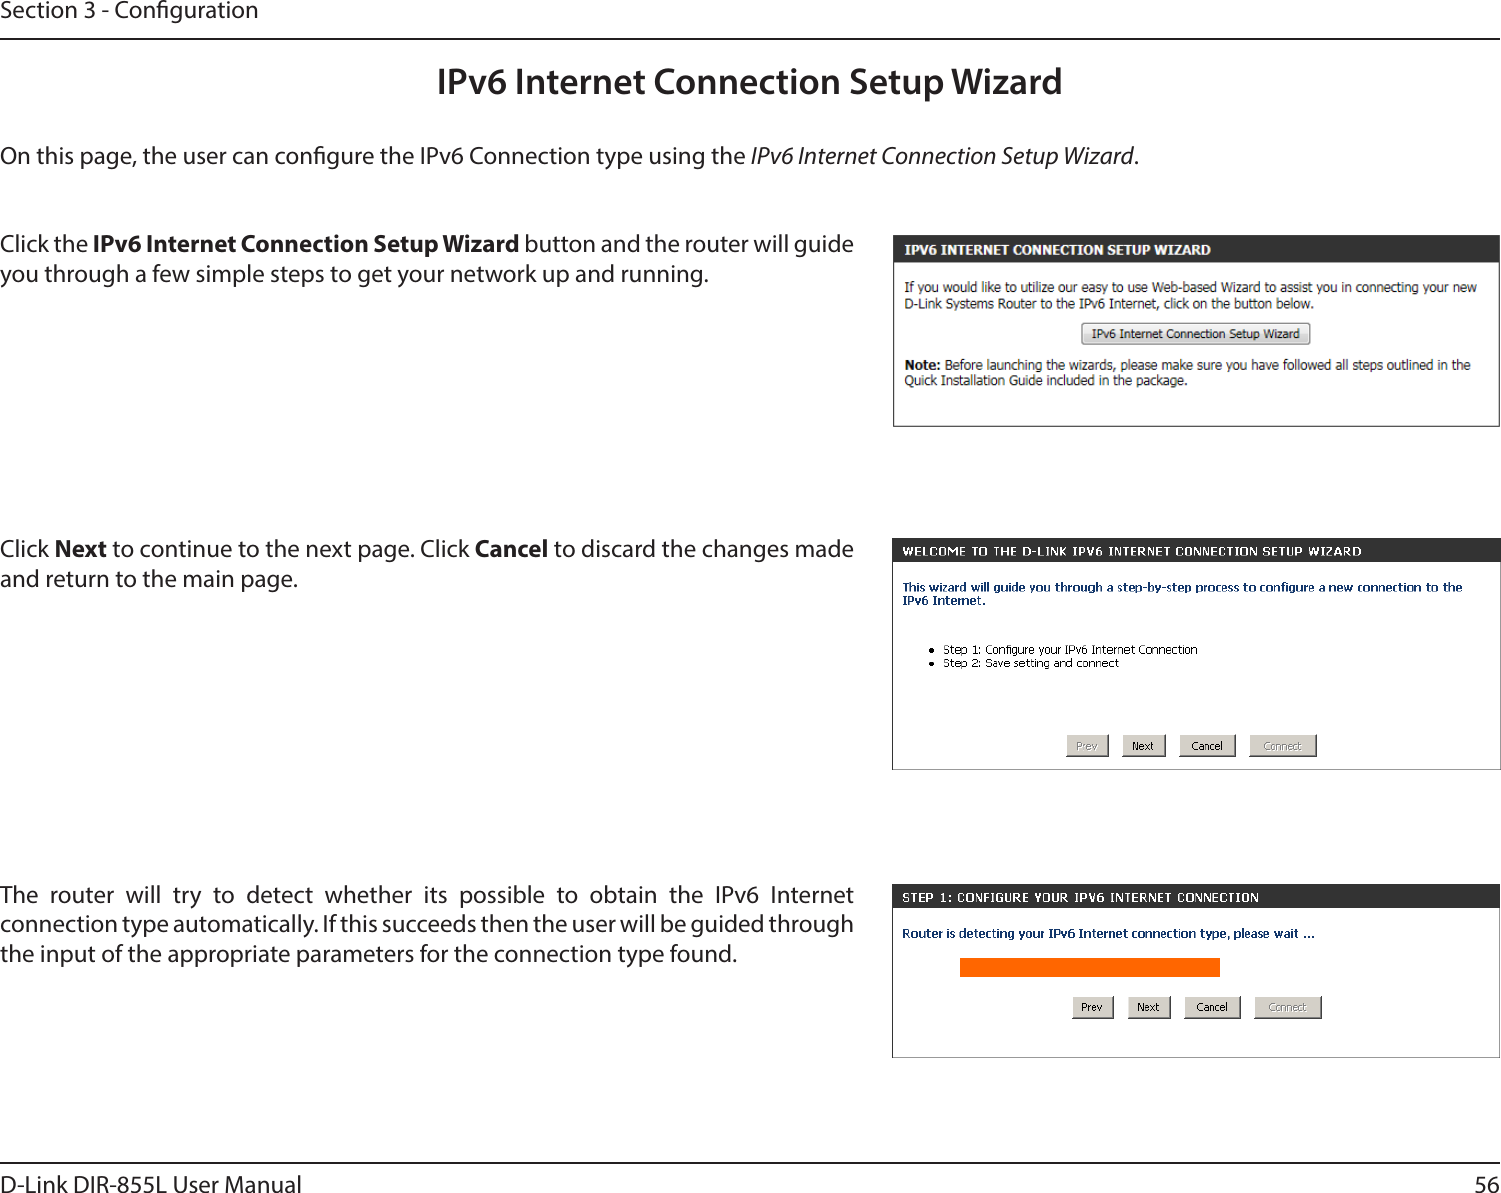 56D-Link DIR-855L User ManualSection 3 - CongurationIPv6 Internet Connection Setup WizardOn this page, the user can congure the IPv6 Connection type using the IPv6 Internet Connection Setup Wizard.Click the IPv6InternetConnectionSetupWizard button and the router will guide you through a few simple steps to get your network up and running.Click Next to continue to the next page. Click Cancel to discard the changes made and return to the main page.The router will try to detect whether its possible to obtain the IPv6 Internet connection type automatically. If this succeeds then the user will be guided through the input of the appropriate parameters for the connection type found.